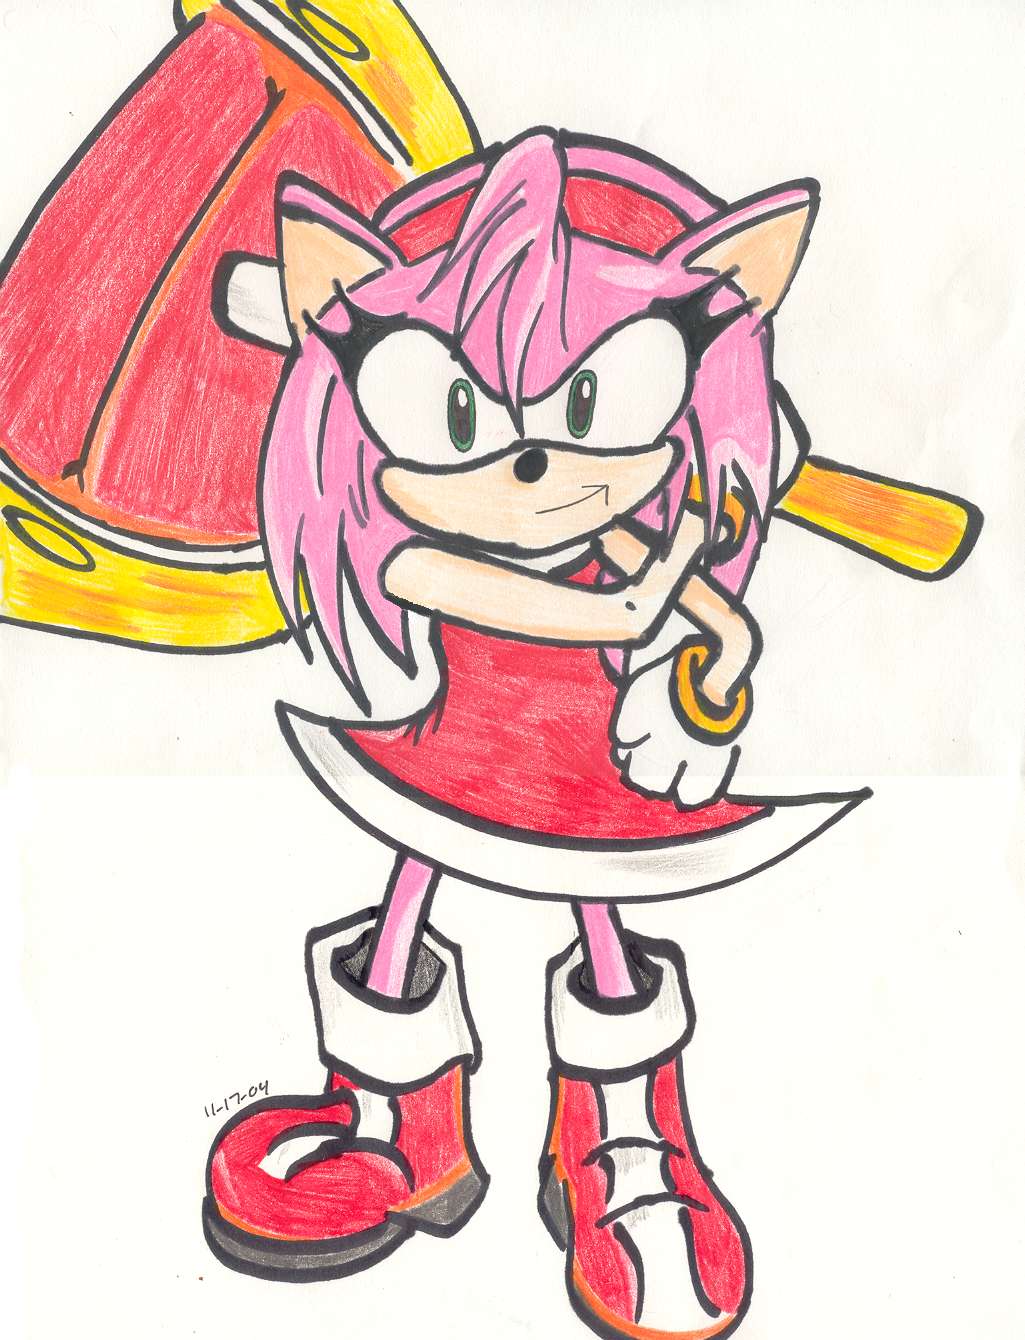 Amy Rose "come on" by mylilwashu